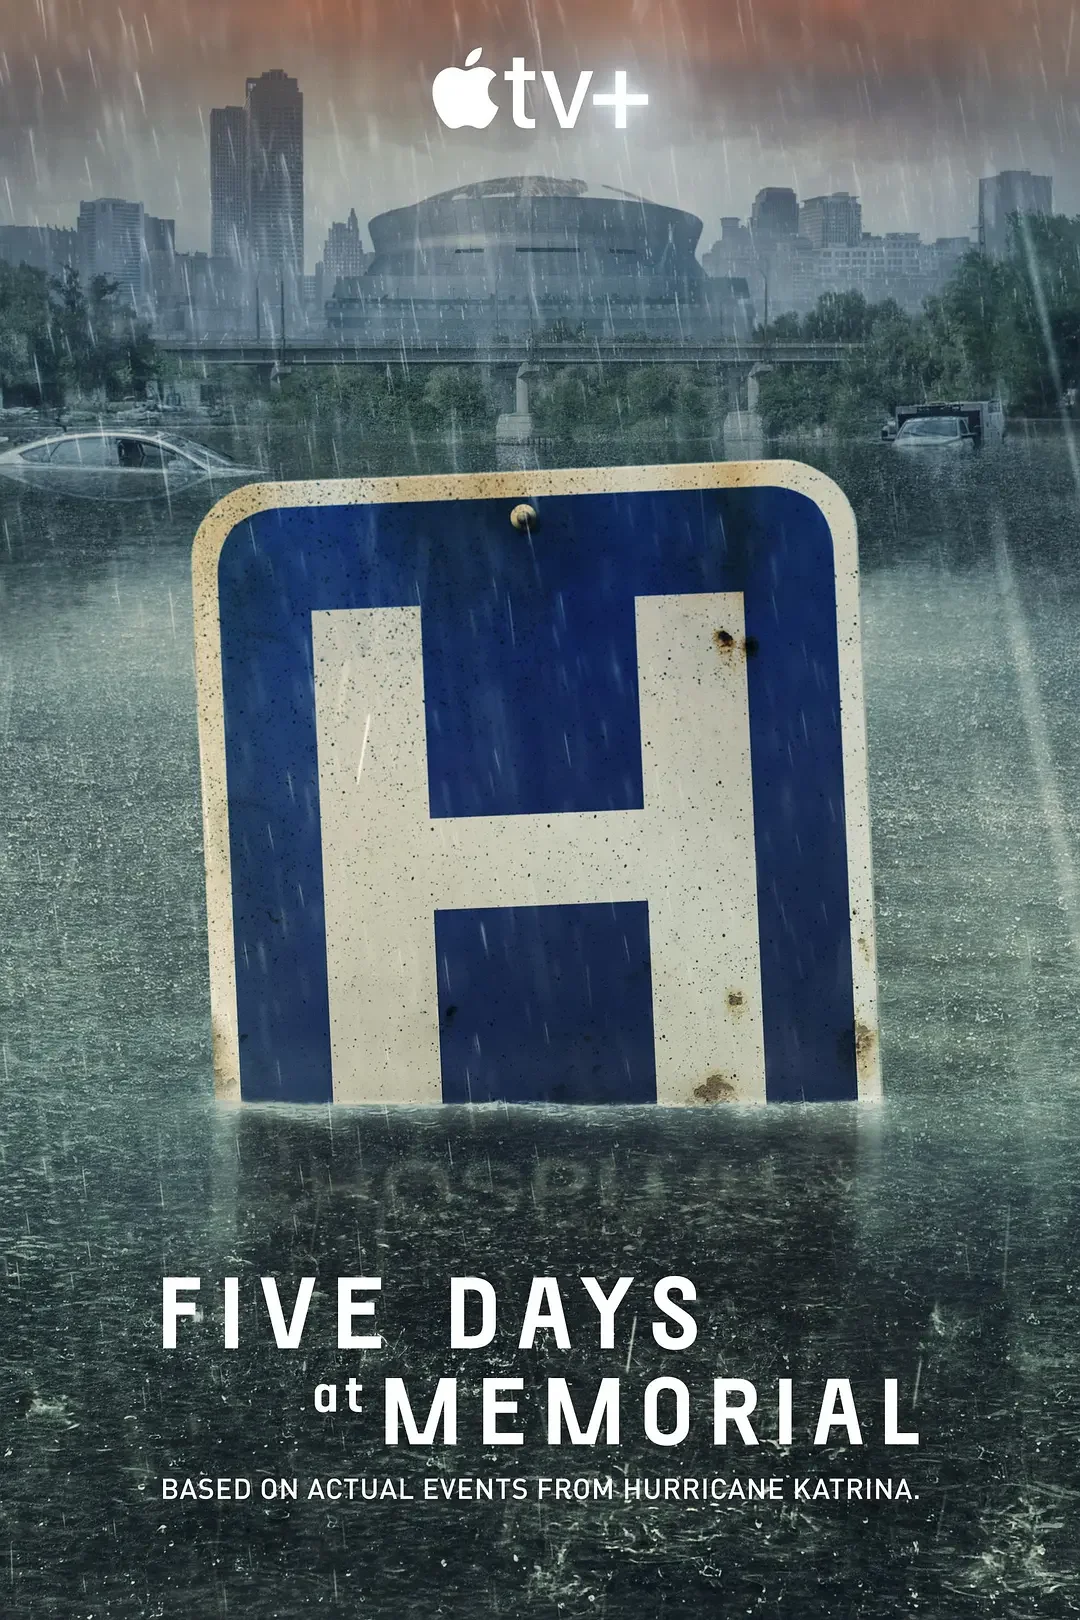 "Five Days at Memorial" release Official Trailer, it will be available on Apple TV+ on August 12 | FMV6